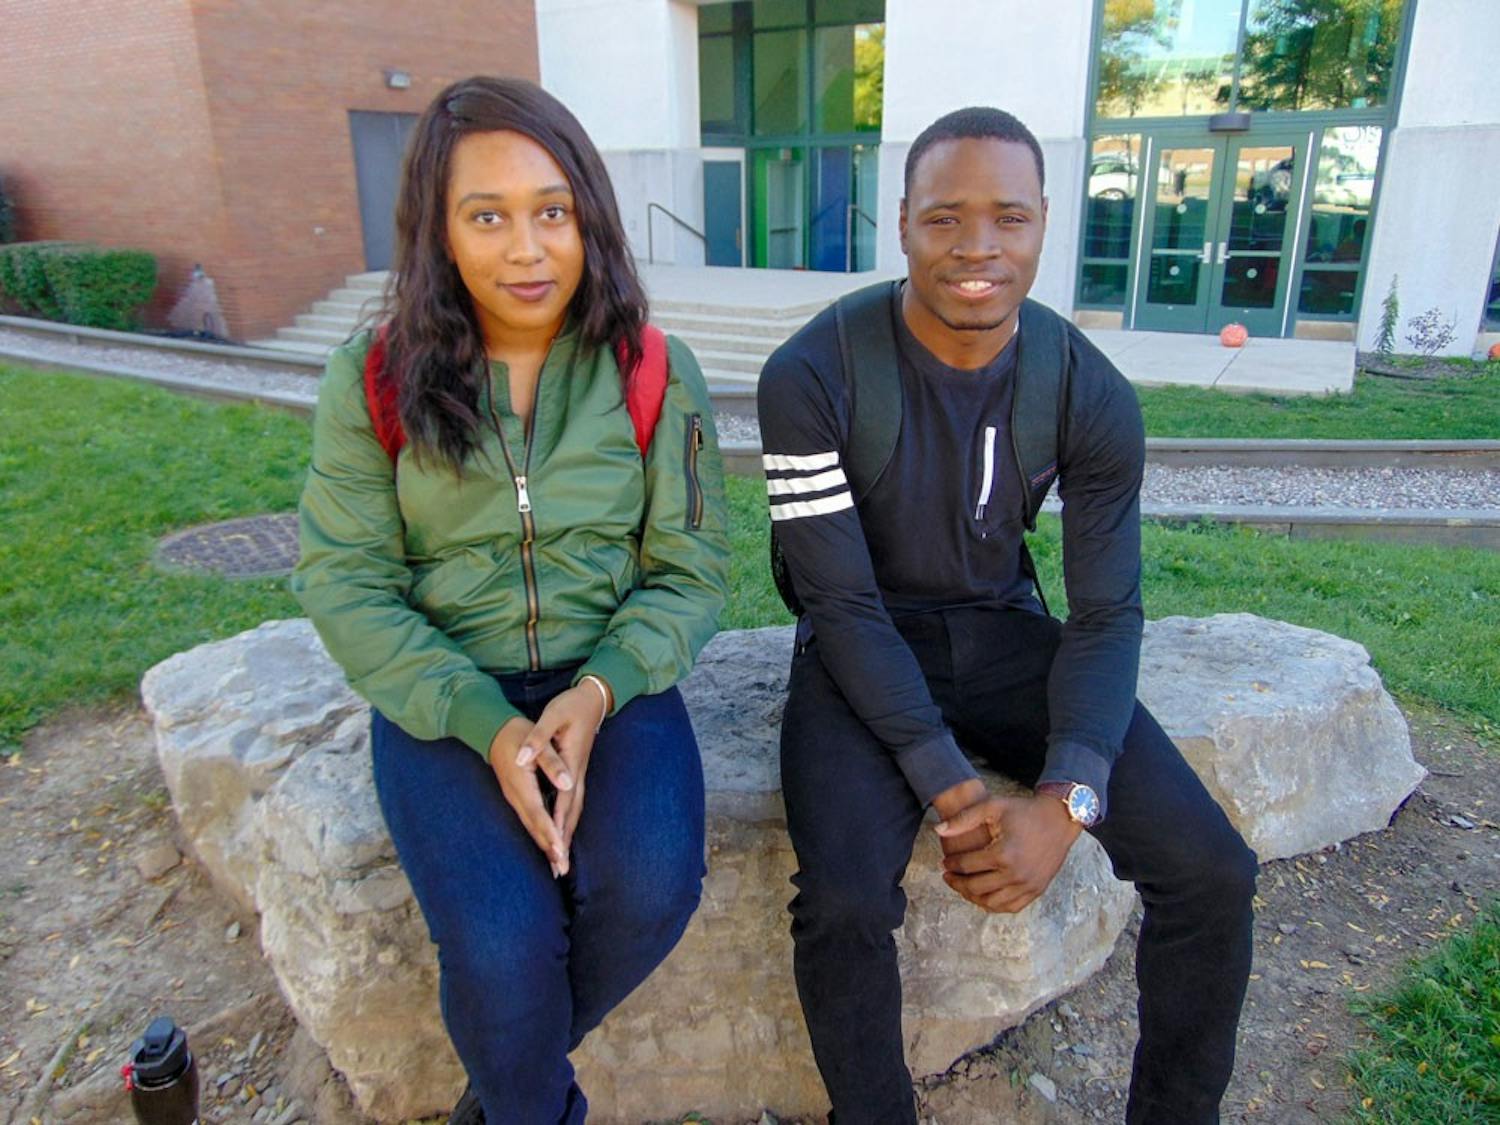 Angelique Romulus and Malcolm Gray joined the Black Student Union to engage with the black community on campus. Black students and faculty feel the campus is lacking in diversity.